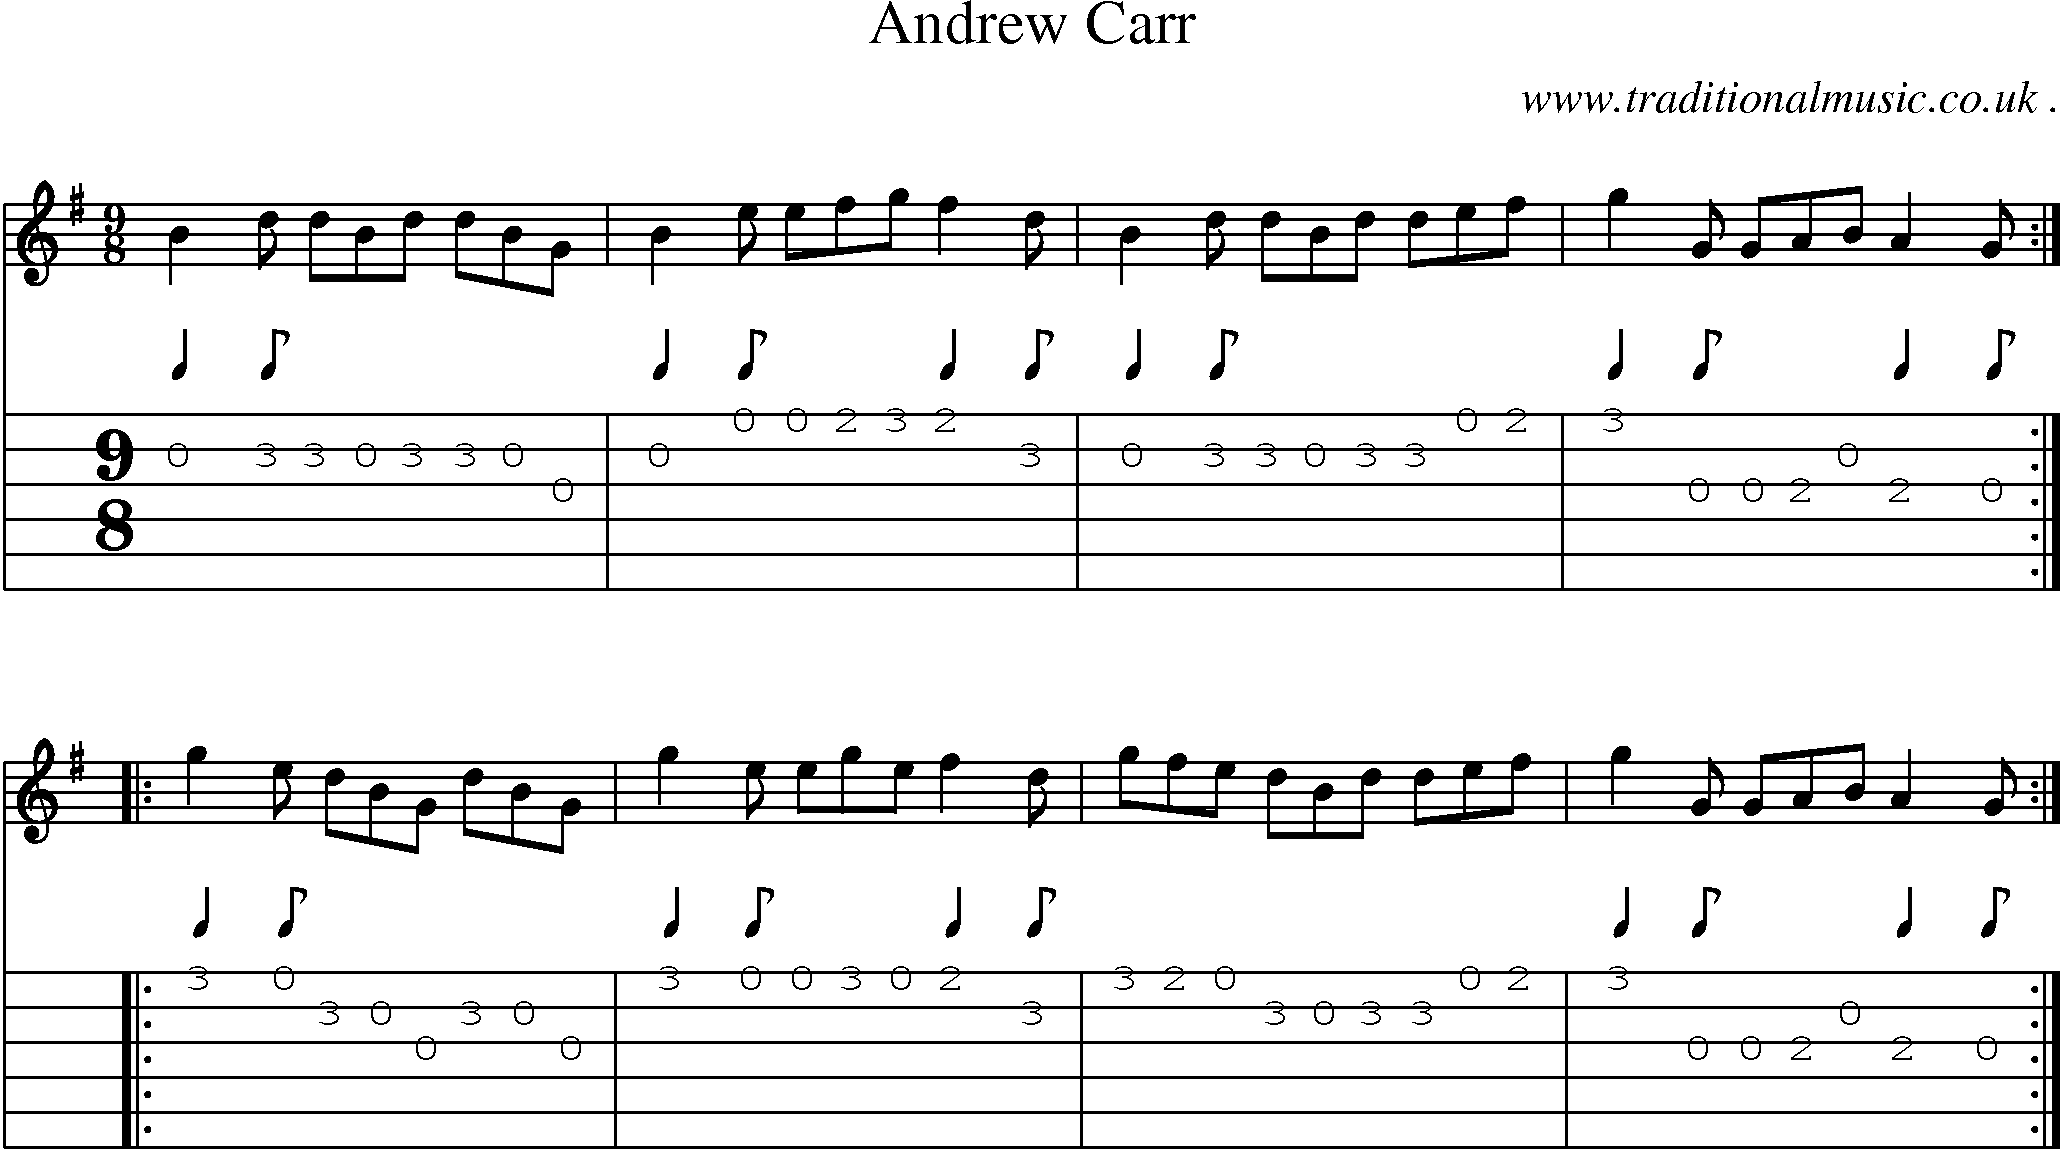 Sheet-music  score, Chords and Guitar Tabs for Andrew Carr